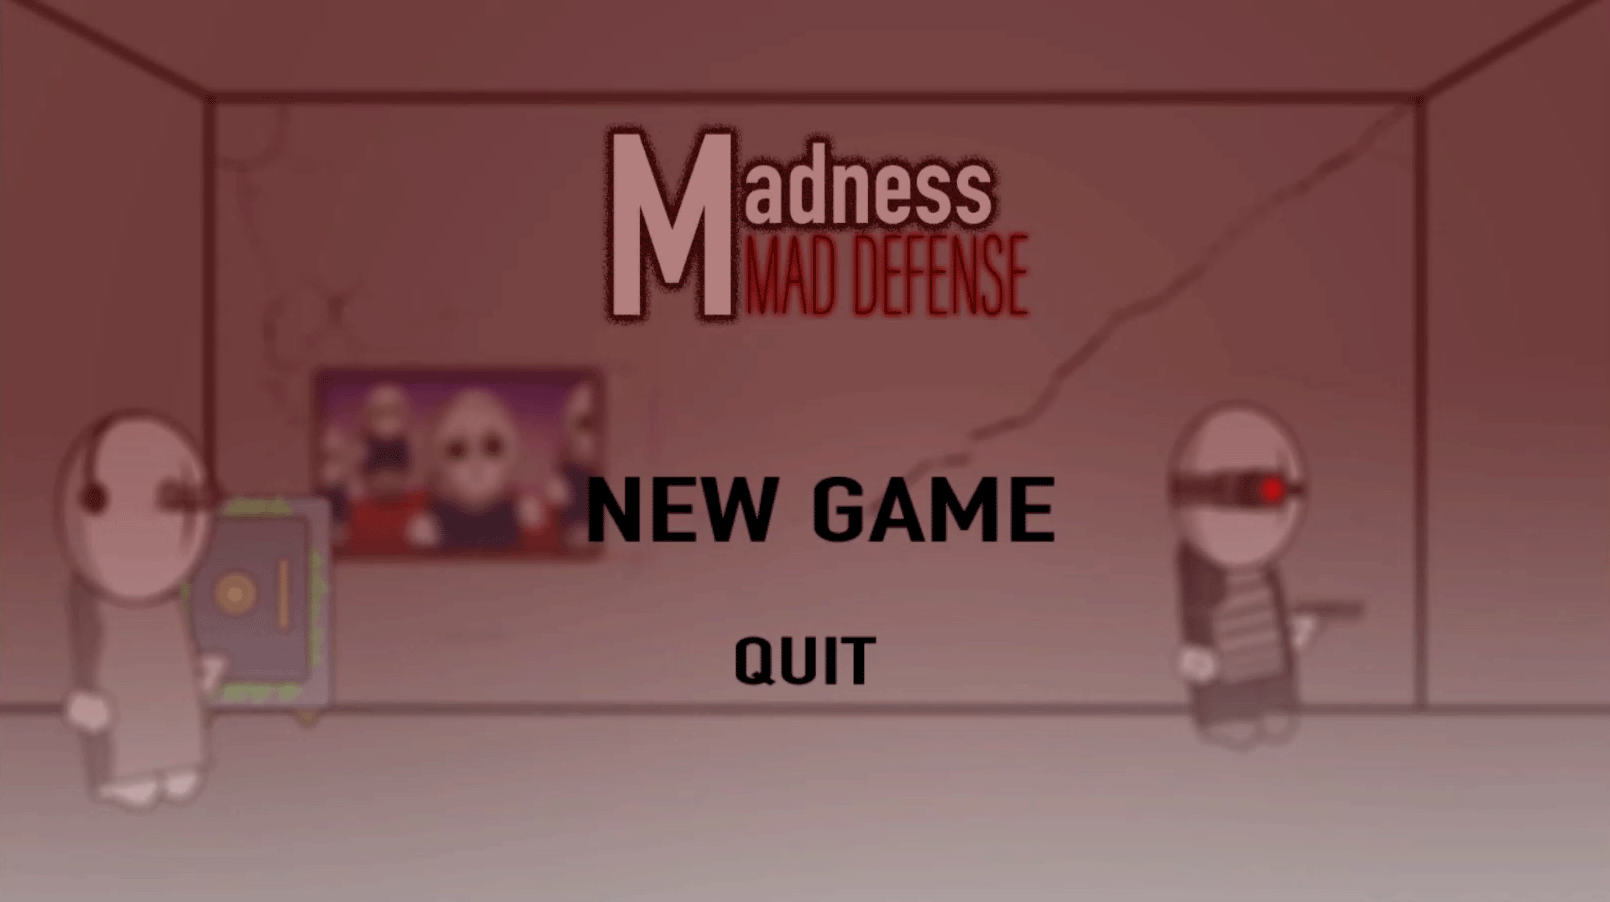 Madness Combat Defense - Play Game Online